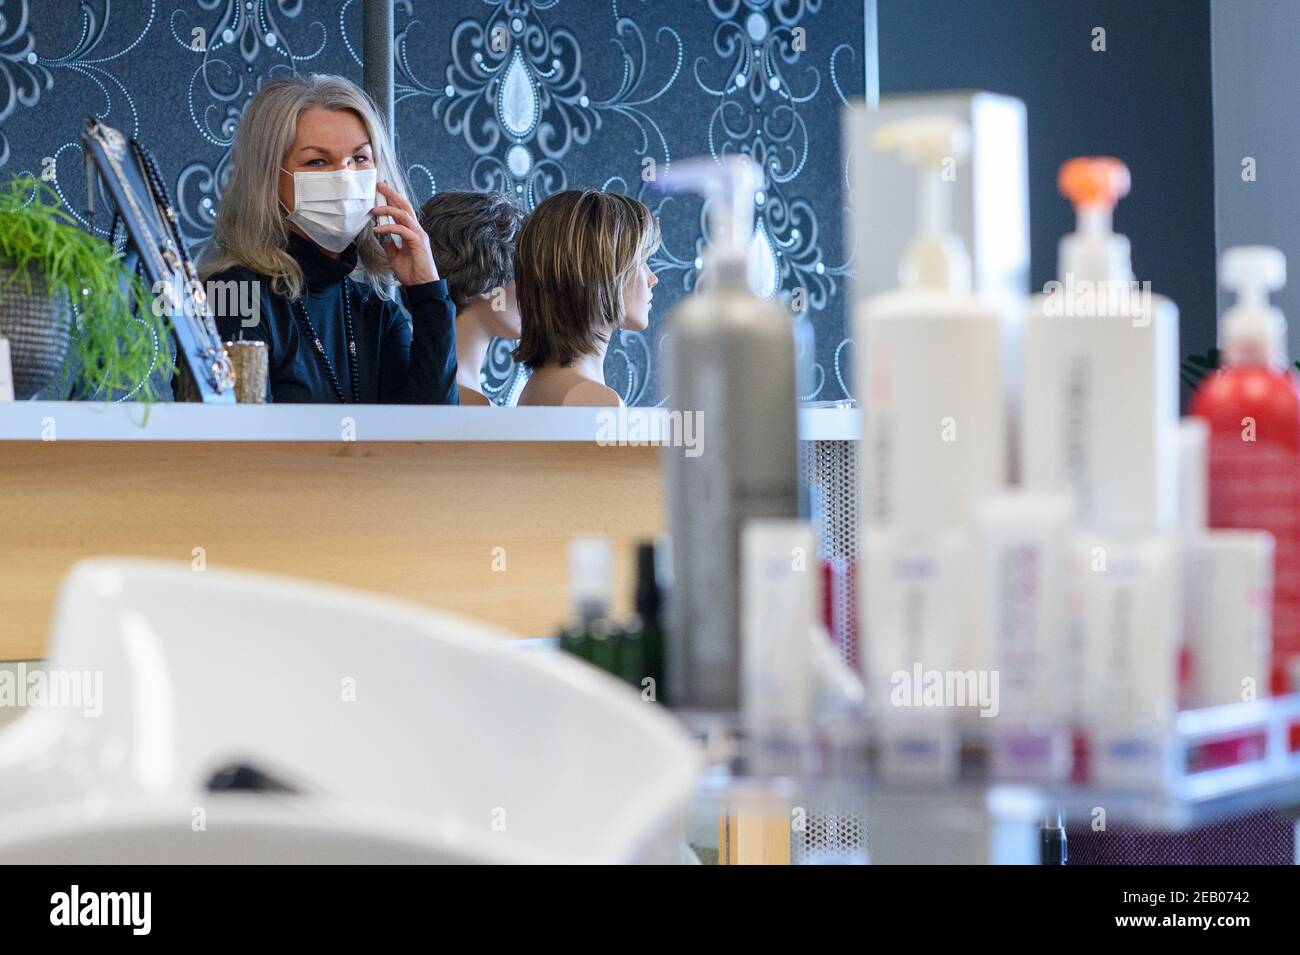 Magdeburg, Germany. 11th Feb, 2021. Antje Raschbacher, master hairdresser  and owner of the hair salon "Die Haarschneider", stands behind the  reception counter and talks to customers on the phone. The owners had